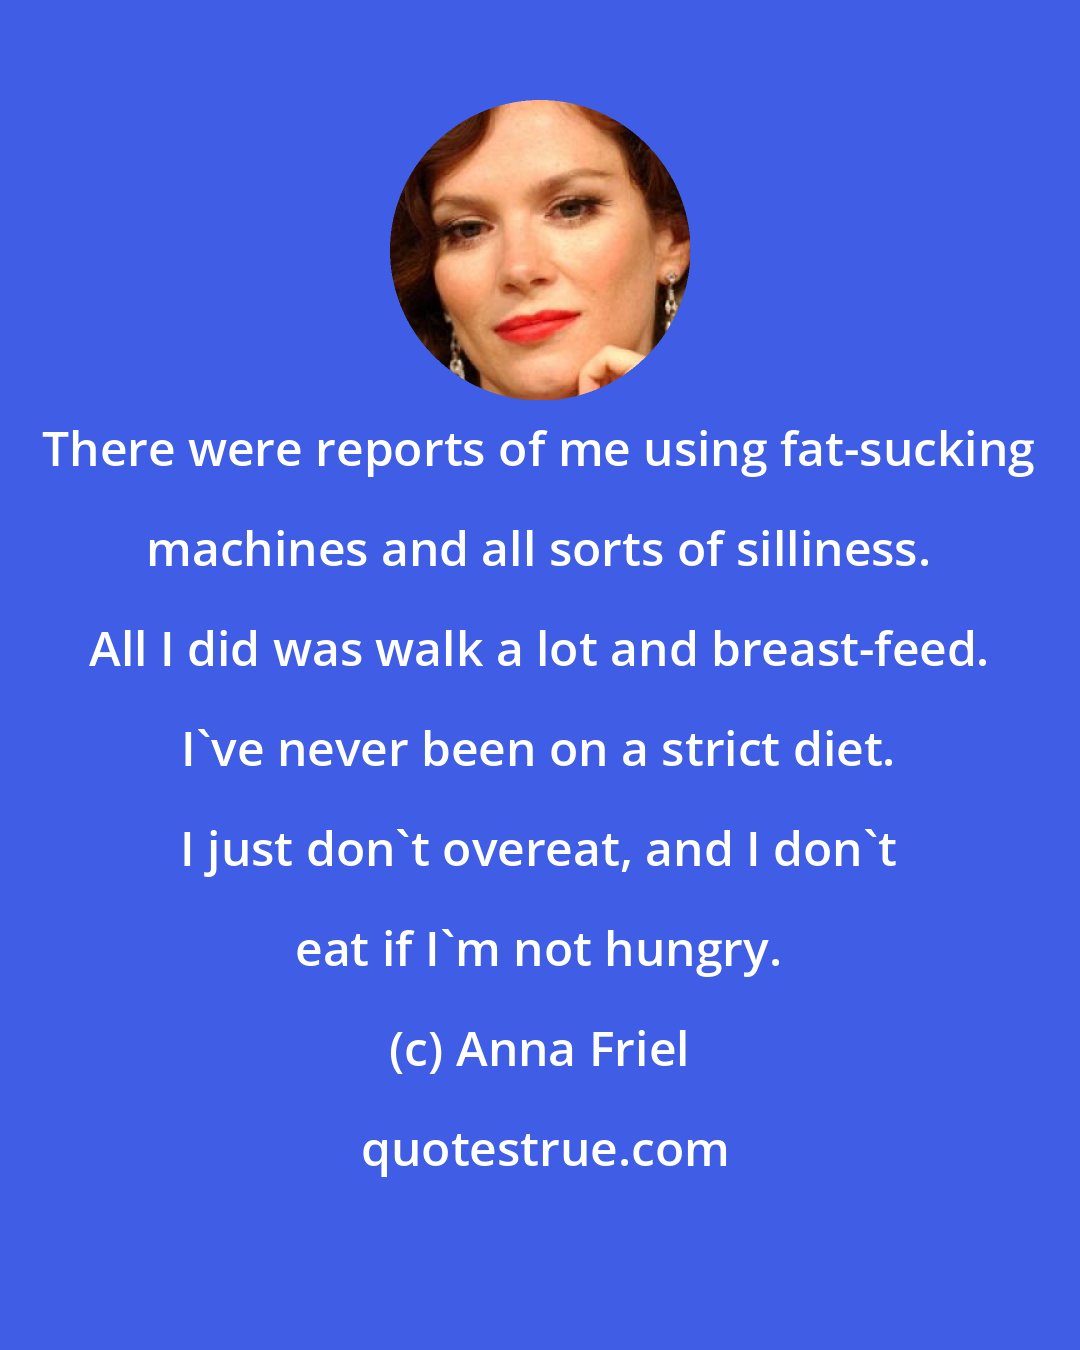 Anna Friel: There were reports of me using fat-sucking machines and all sorts of silliness. All I did was walk a lot and breast-feed. I've never been on a strict diet. I just don't overeat, and I don't eat if I'm not hungry.